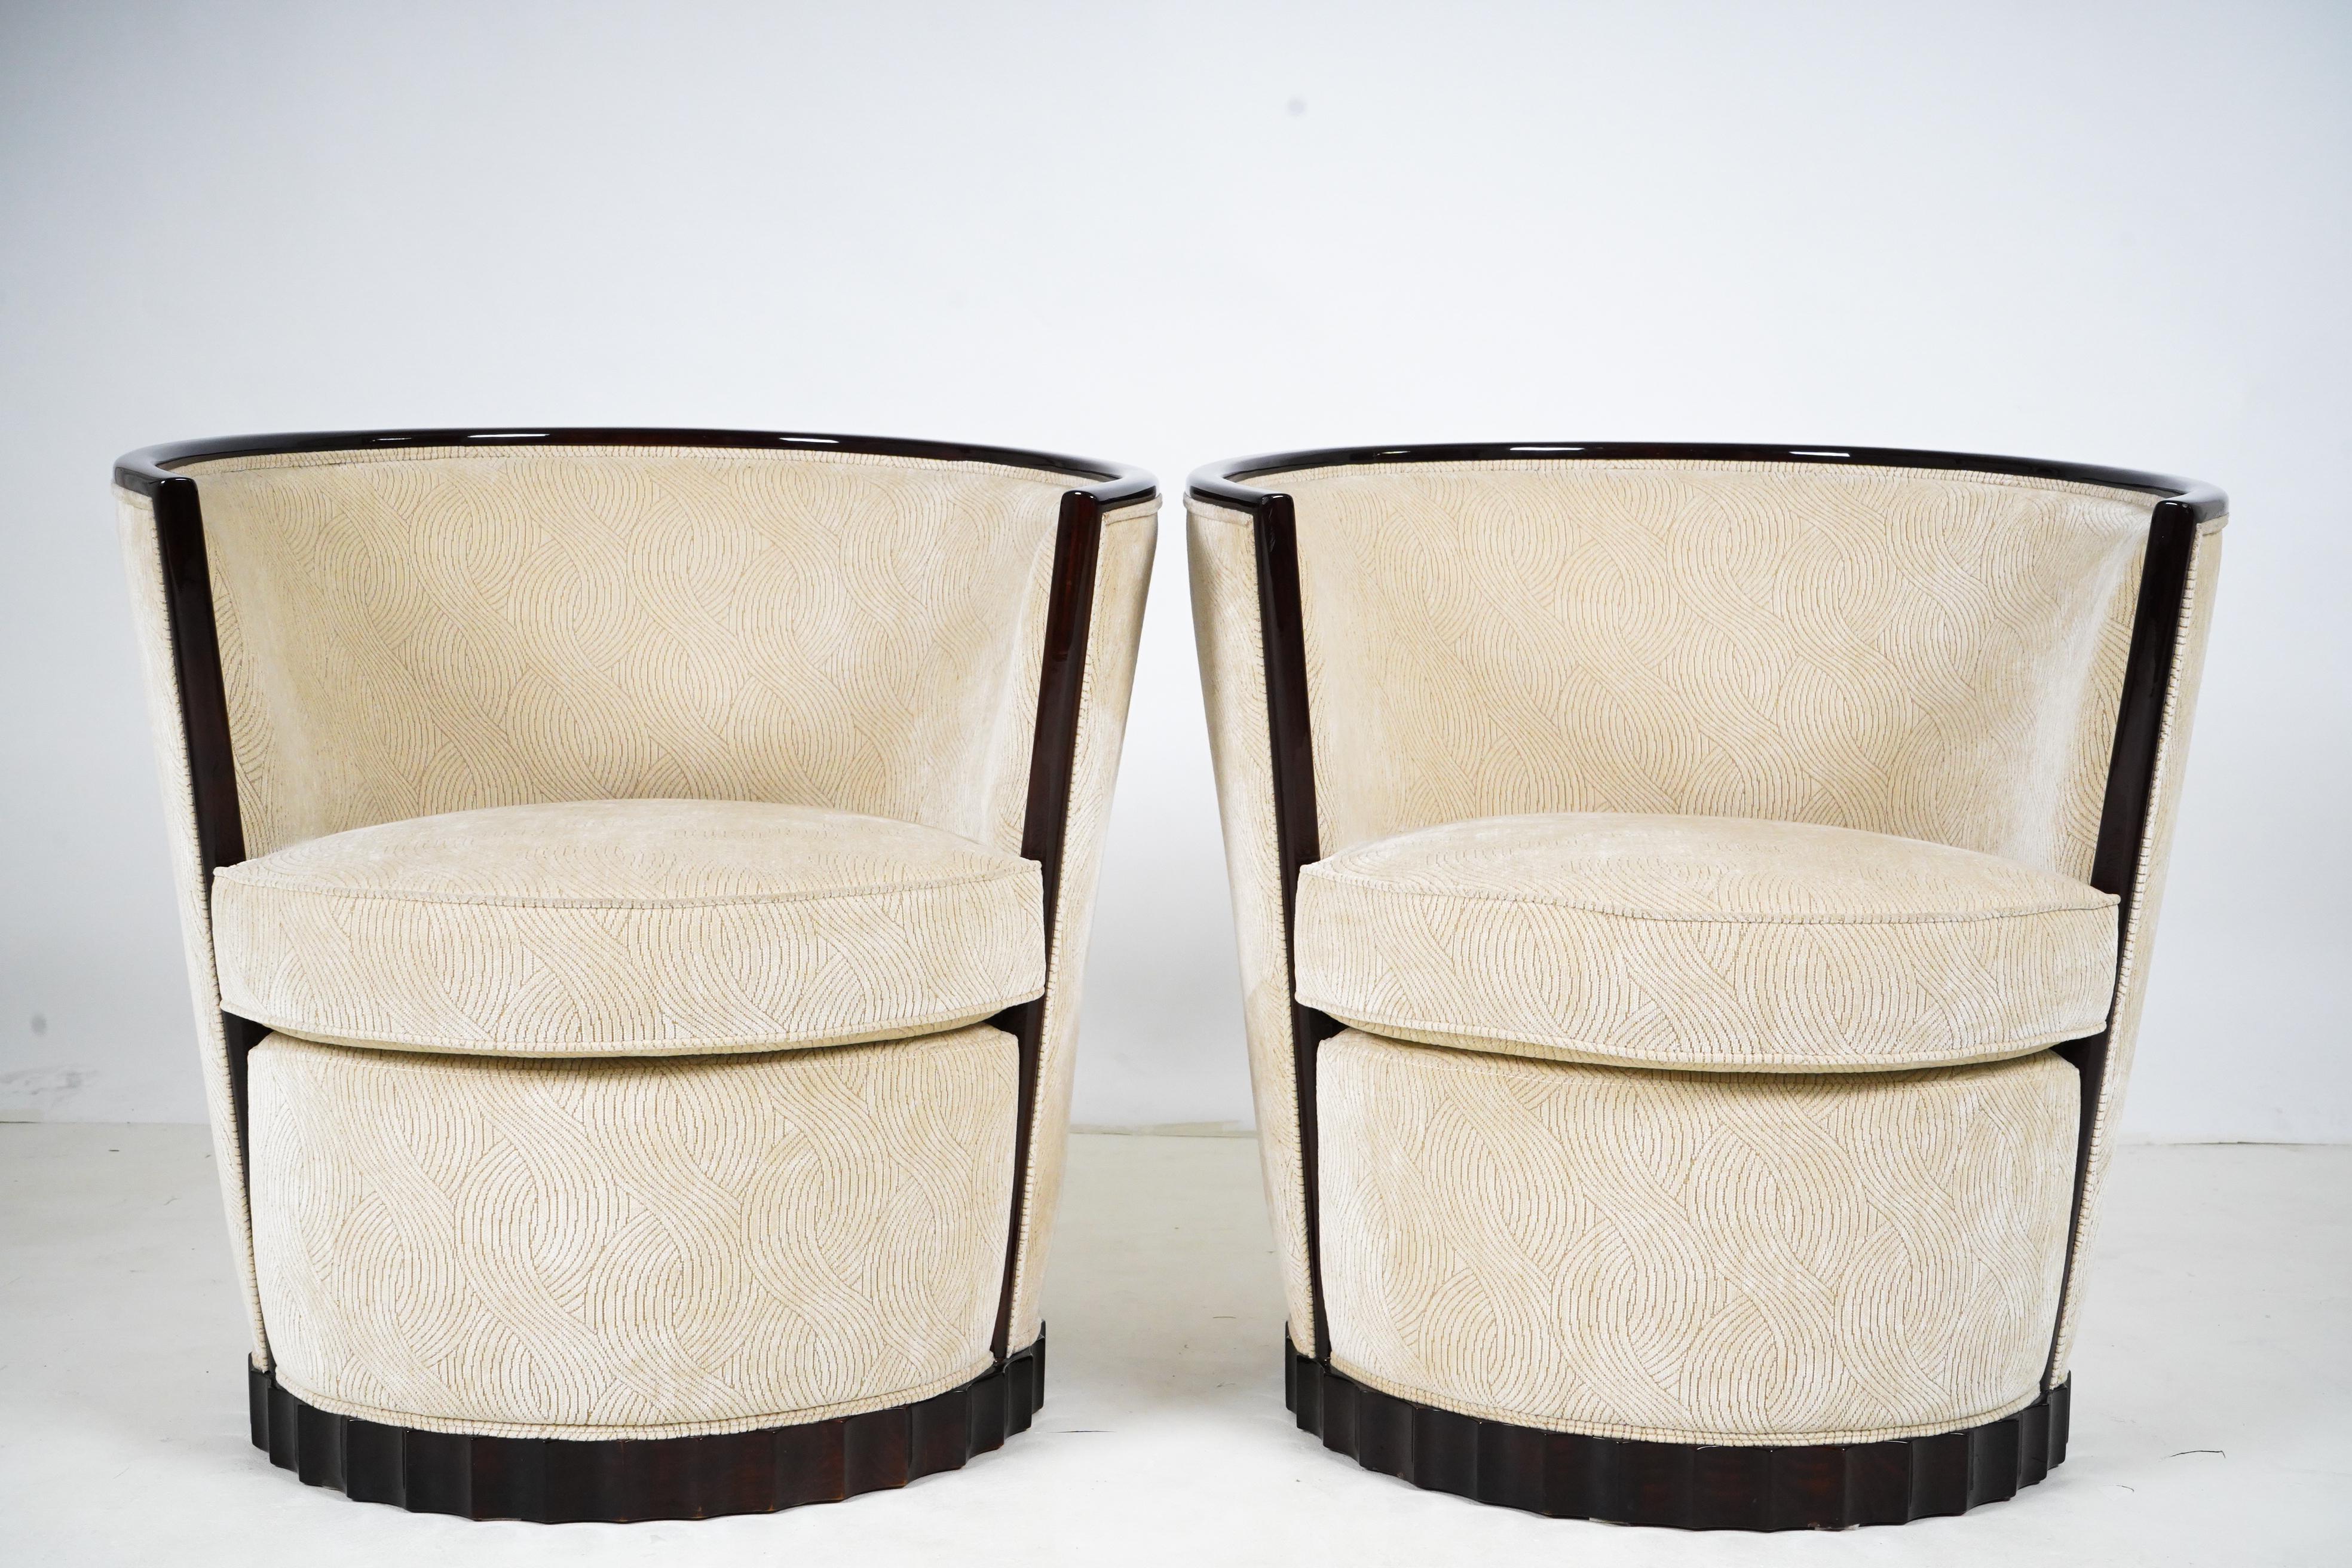 These stylish armchairs are based on a classic French Art Deco design. Hungarian furniture makers thrived through the interwar period, perfecting streamlined Art Deco designs, which mostly originated in France. However, Hungarians tended to simplify